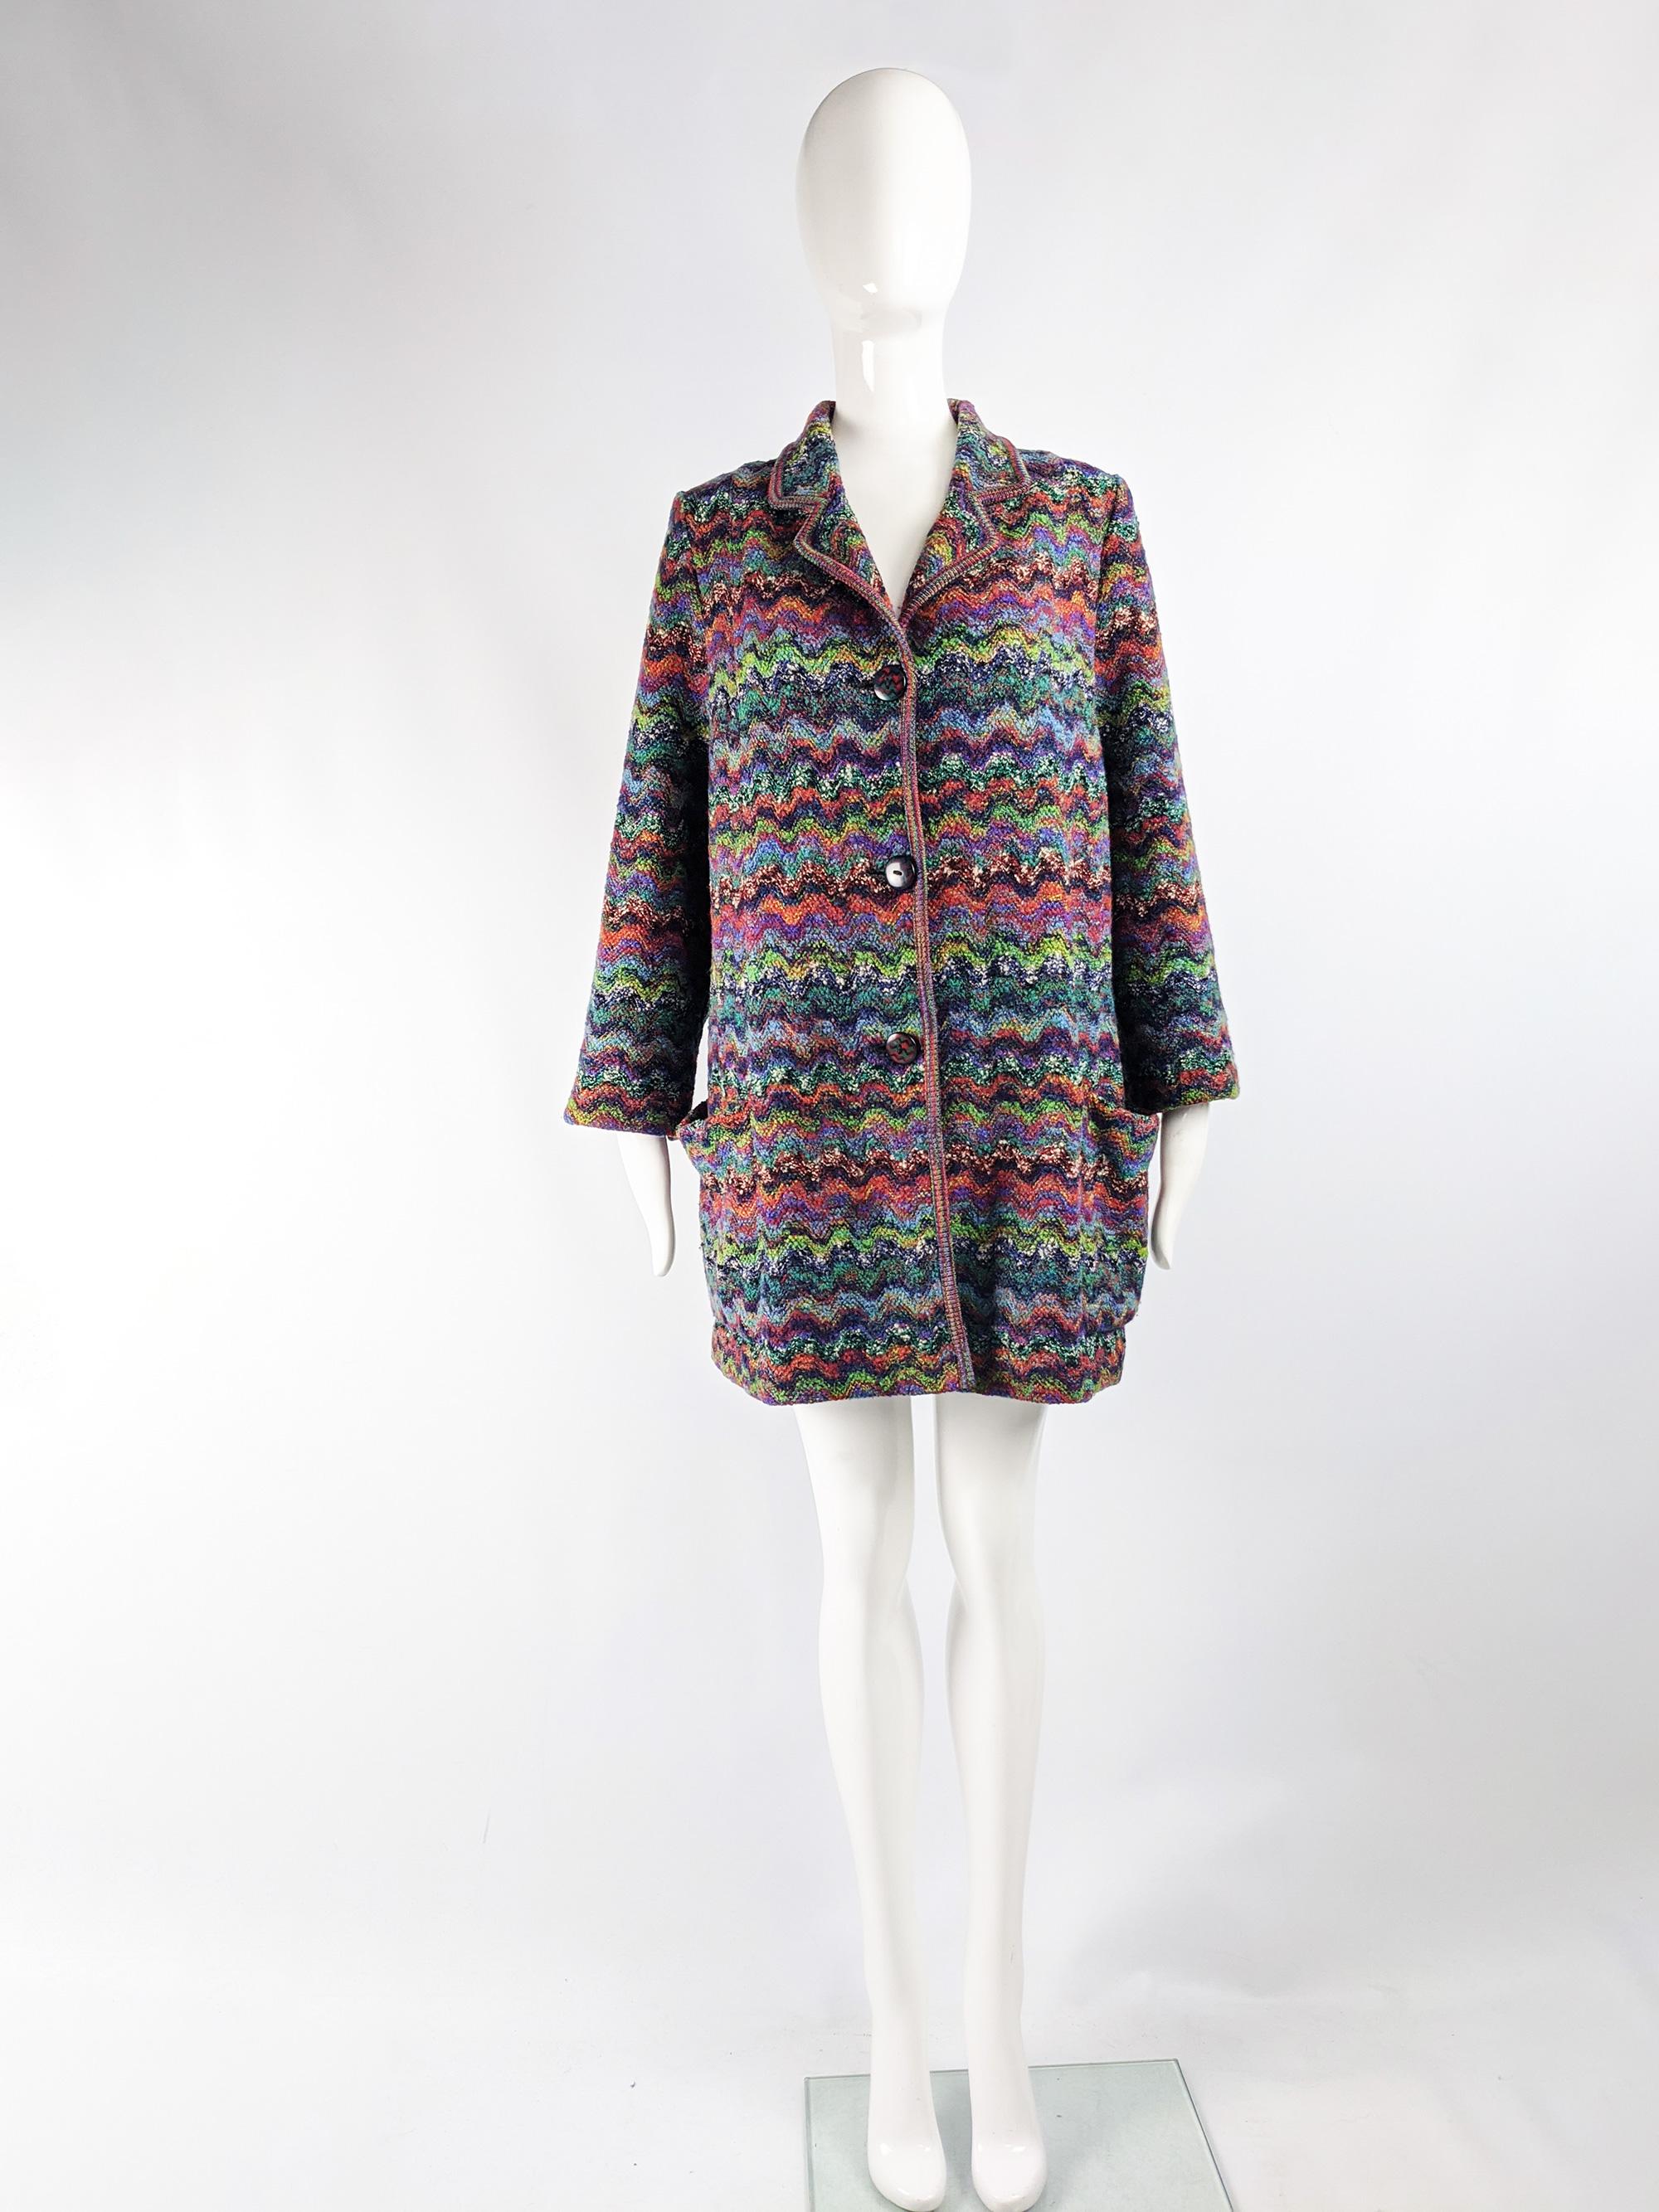 A beautiful vintage womens Missoni for Neiman Marcus swing coat from the 80s. In a multicolored boucle wool knit with Missoni's iconig zigzag pattern knitted throughout and printed on the buttons. 

Size: Unlabelled; fits a Small to Large due to